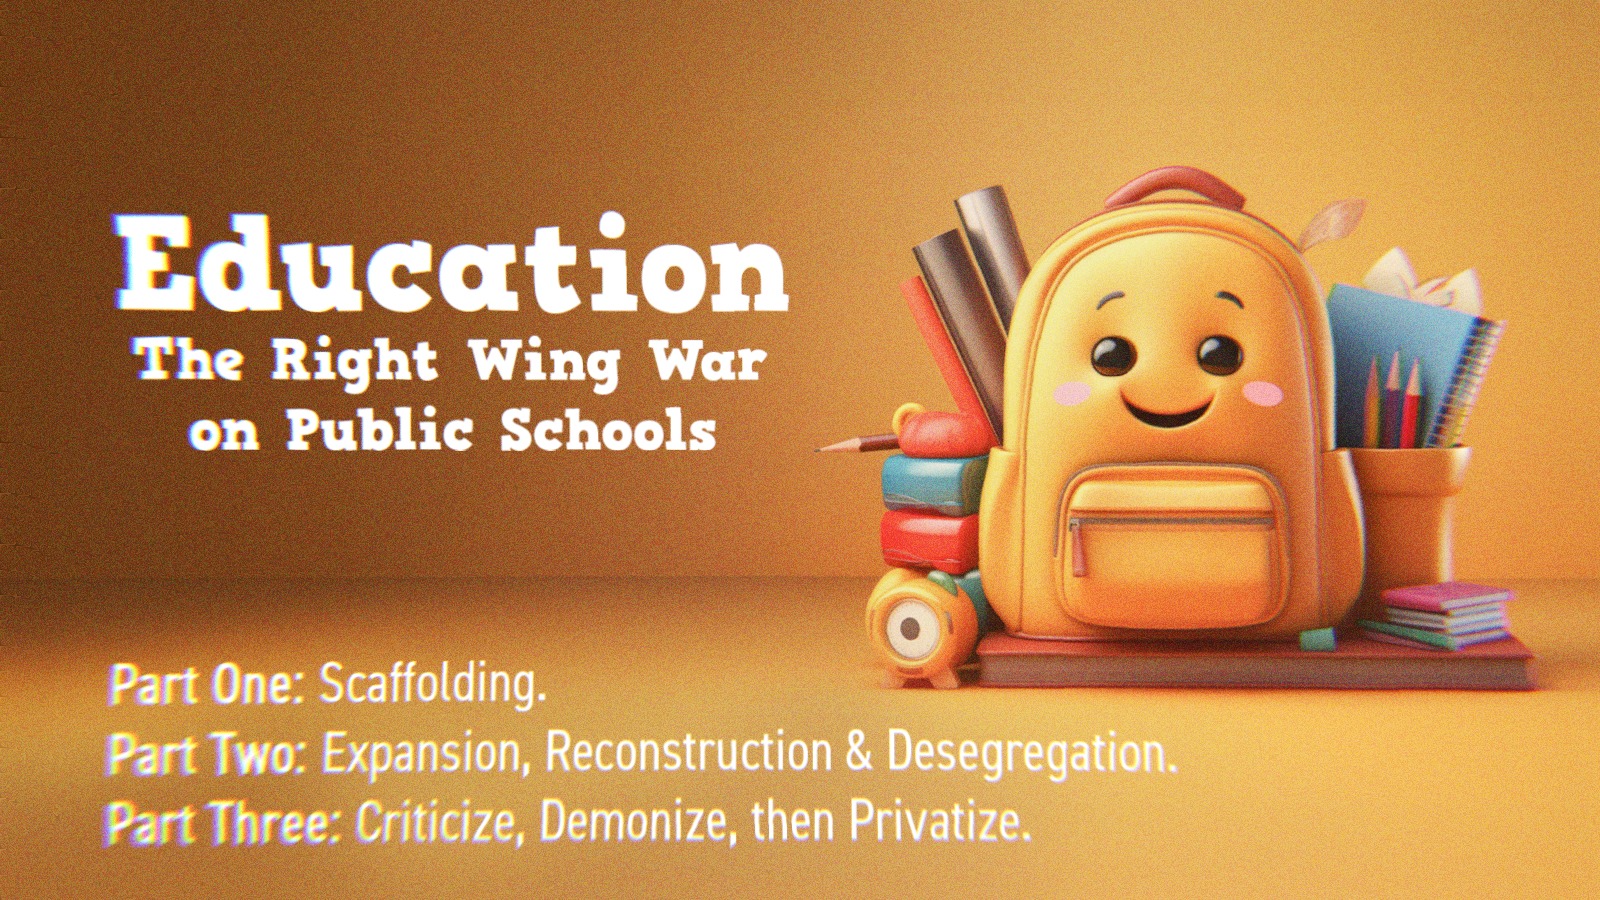 A backpack and school supplies alongside text that says Education- The Right Wing’s War on Public Schools. Part One- Scaffolding. Part Two- Expansion, Reconstruction and Desegregation. Part Three- Criticize, Demonize, then Privatize.